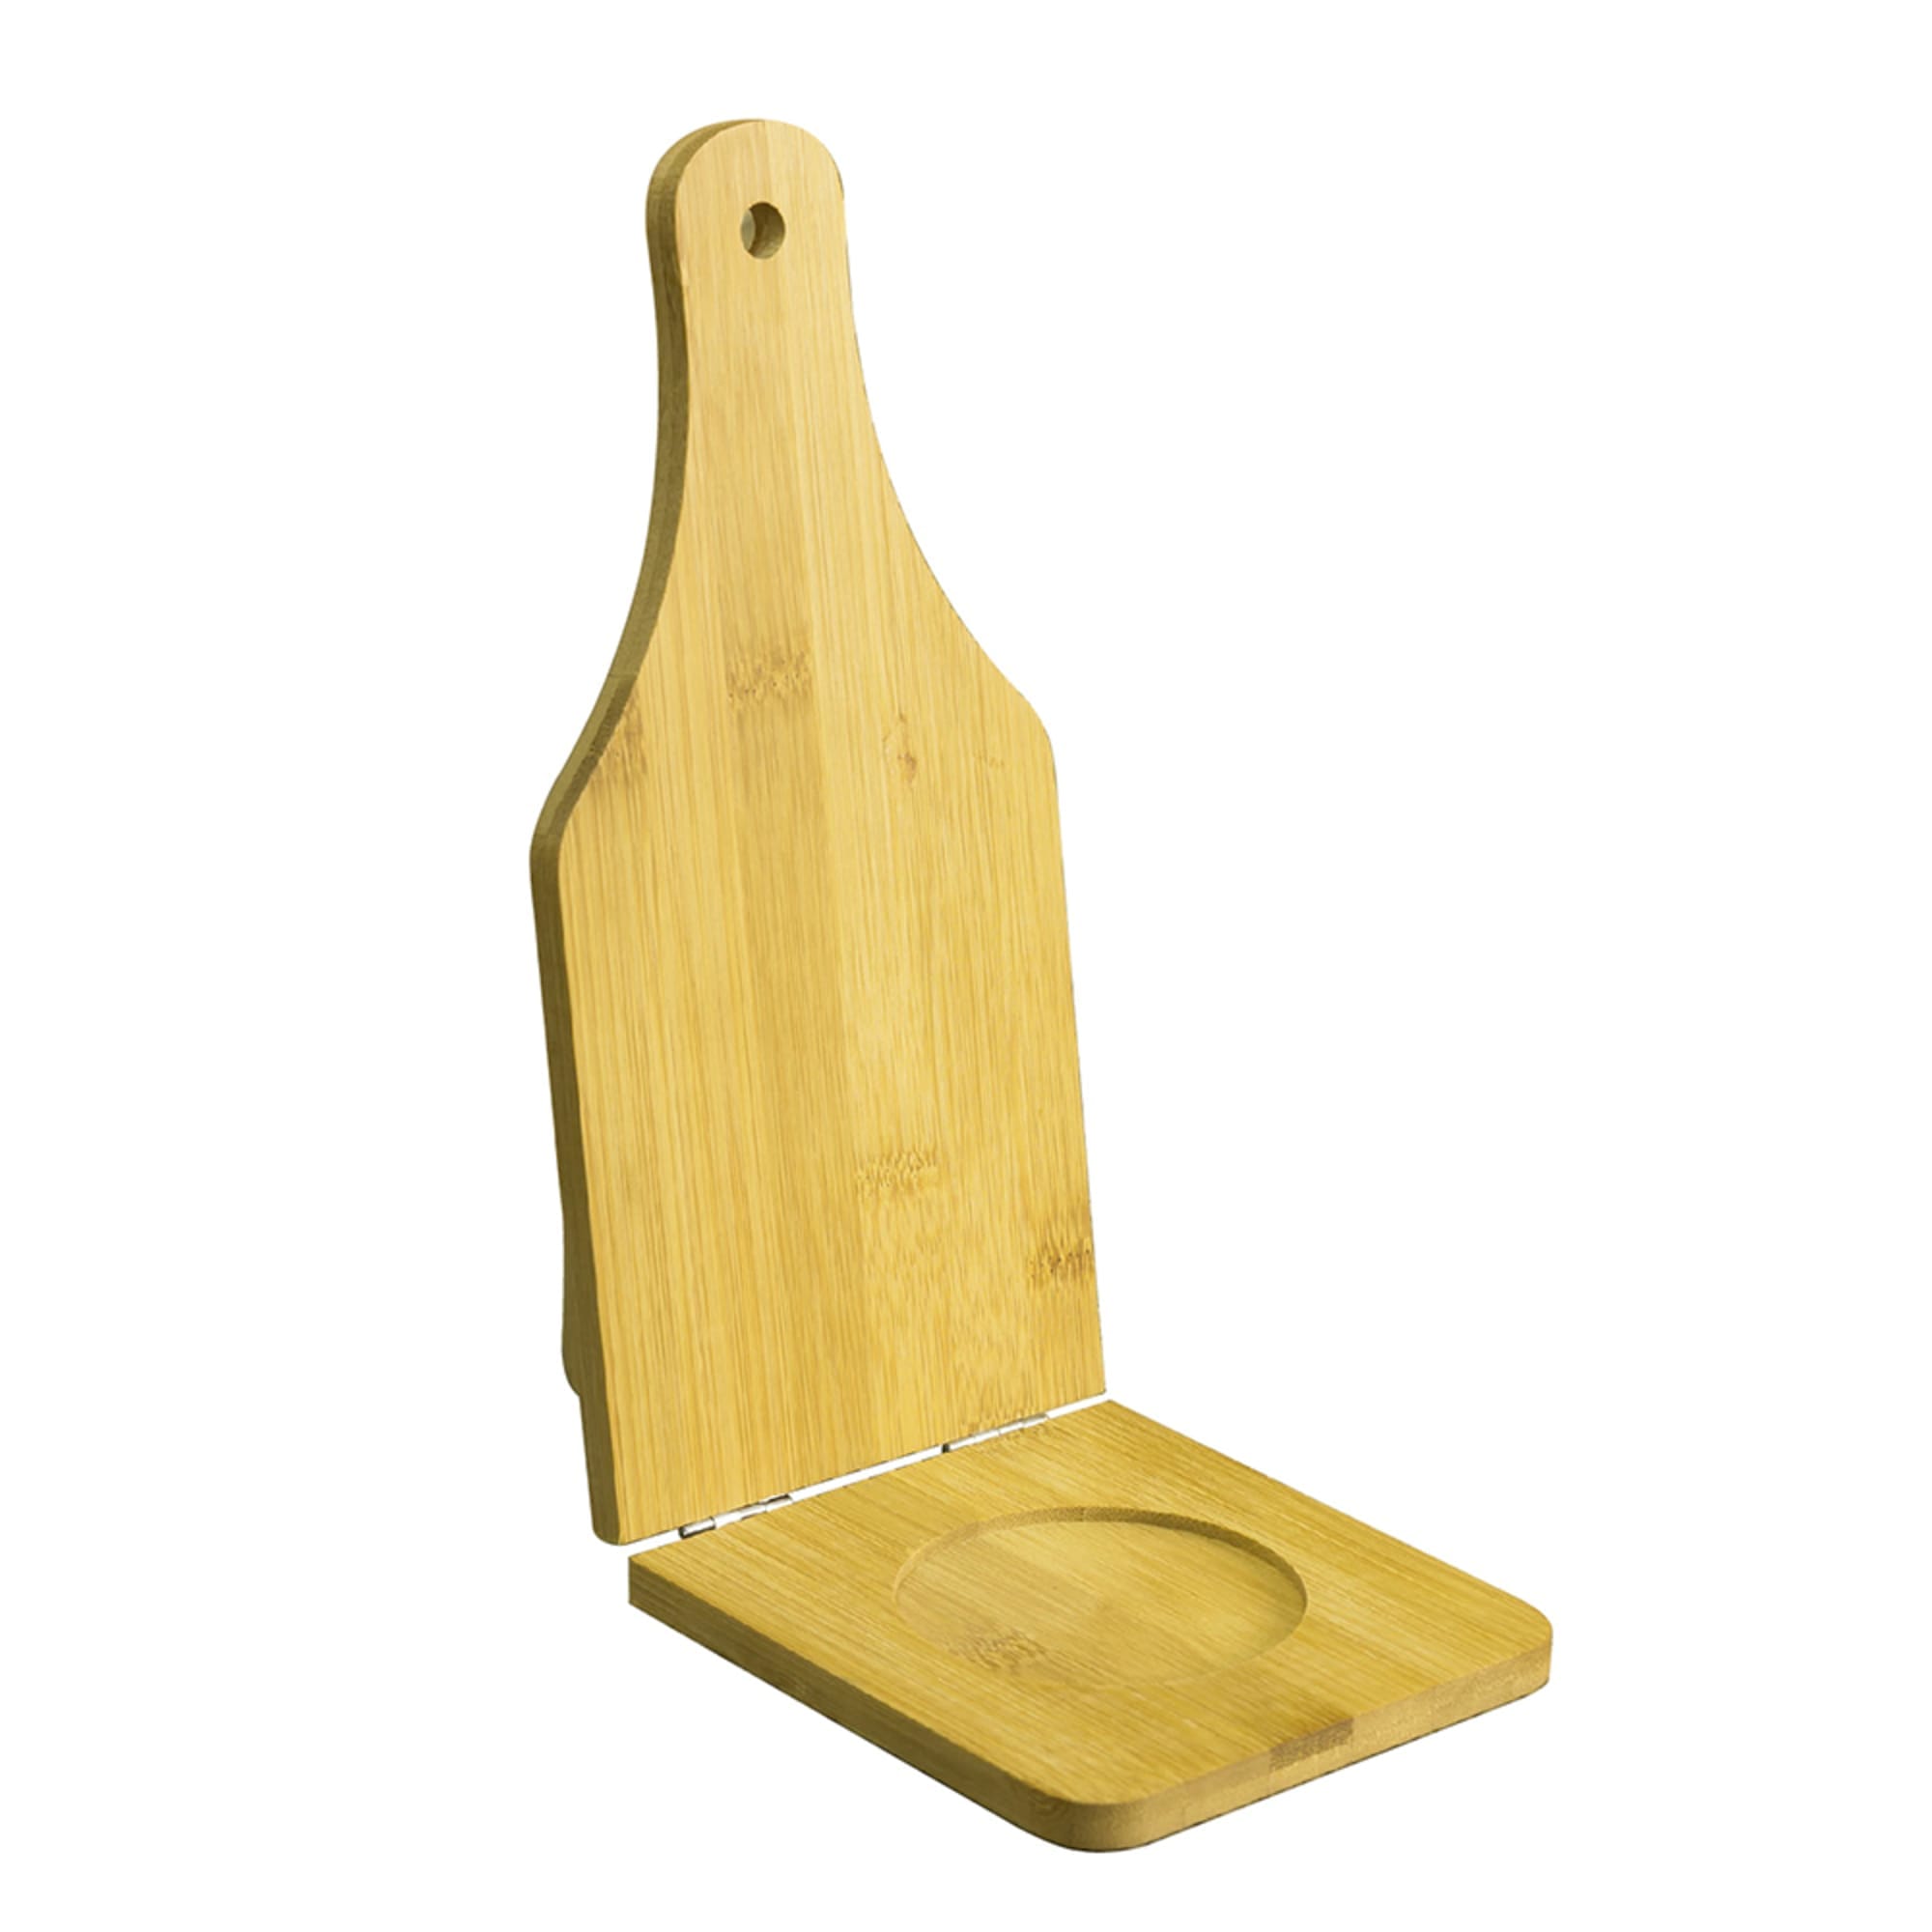 Home Basics Easy Press Small Bamboo Tostonera, Natural $2.00 EACH, CASE PACK OF 24